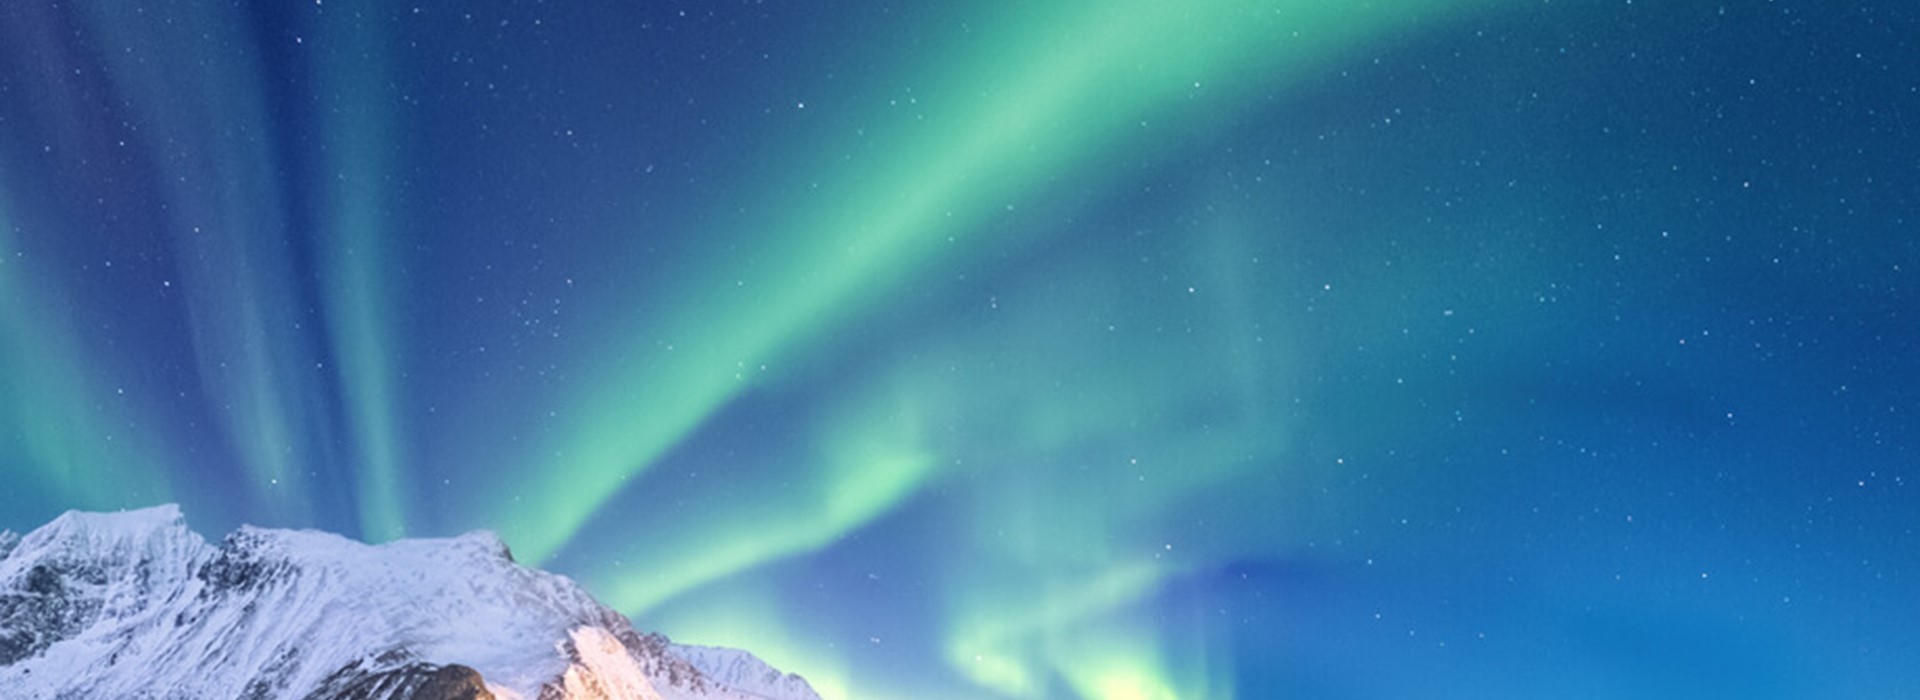 tourhub | Newmarket Holidays | Norway's Land of the Northern Lights from Tilbury 